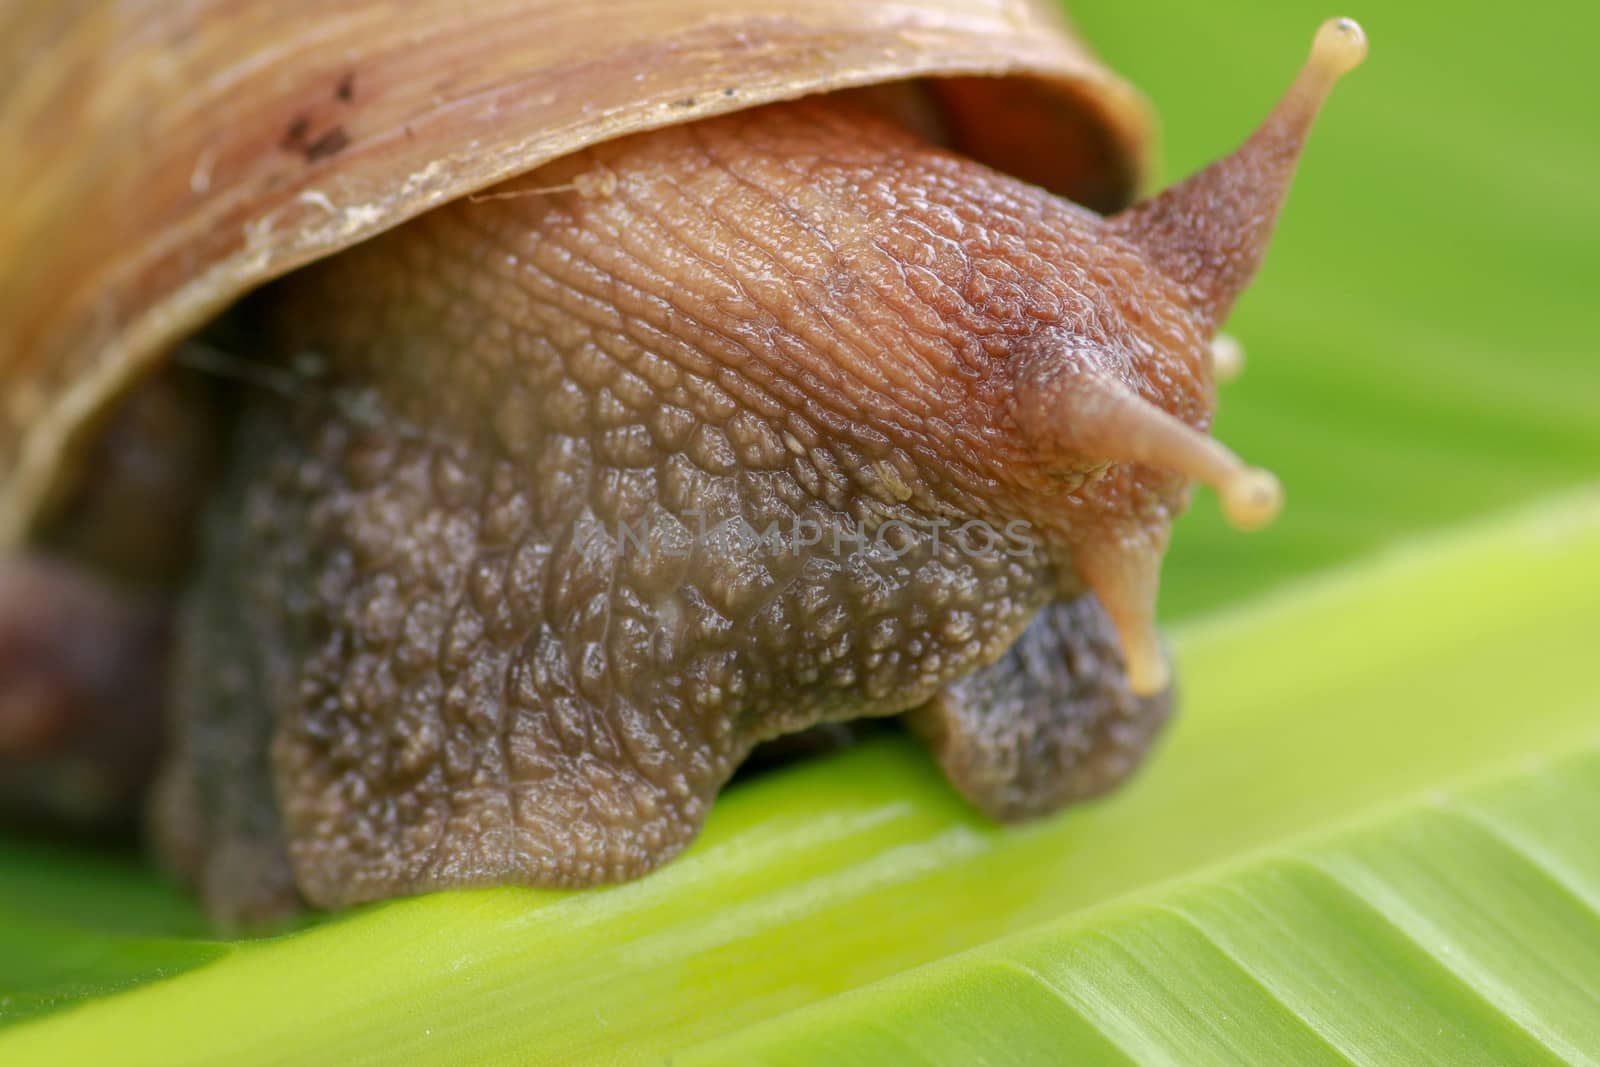 Close up of snail in the rainforest southeast asia. Front view of Achatina Fulica. A large adult snail climbs on a banana leaf in a tropical rainforest.